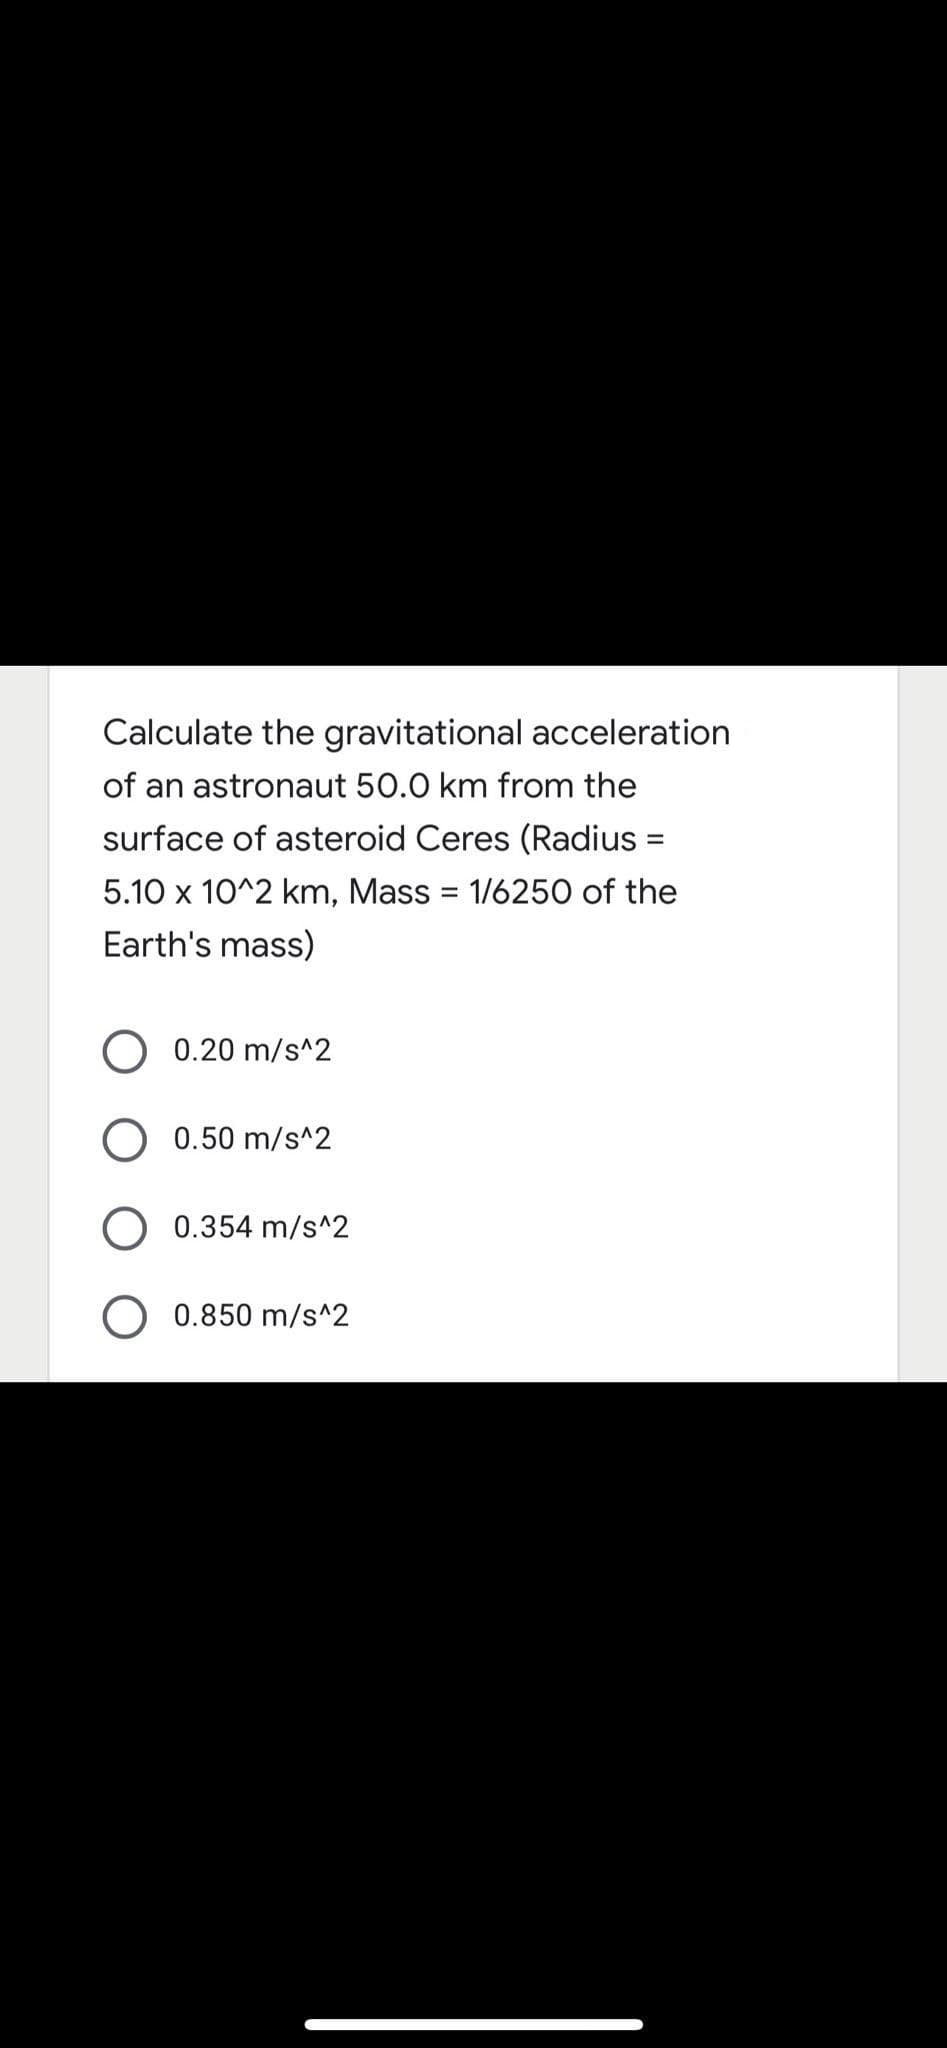 Calculate the gravitational acceleration
of an astronaut 50.0 km from the
surface of asteroid Ceres (Radius =
5.10 x 10^2 km, Mass = 1/6250 of the
%3D
Earth's mass)
0.20 m/s^2
0.50 m/s^2
0.354 m/s^2
0.850 m/s^2
